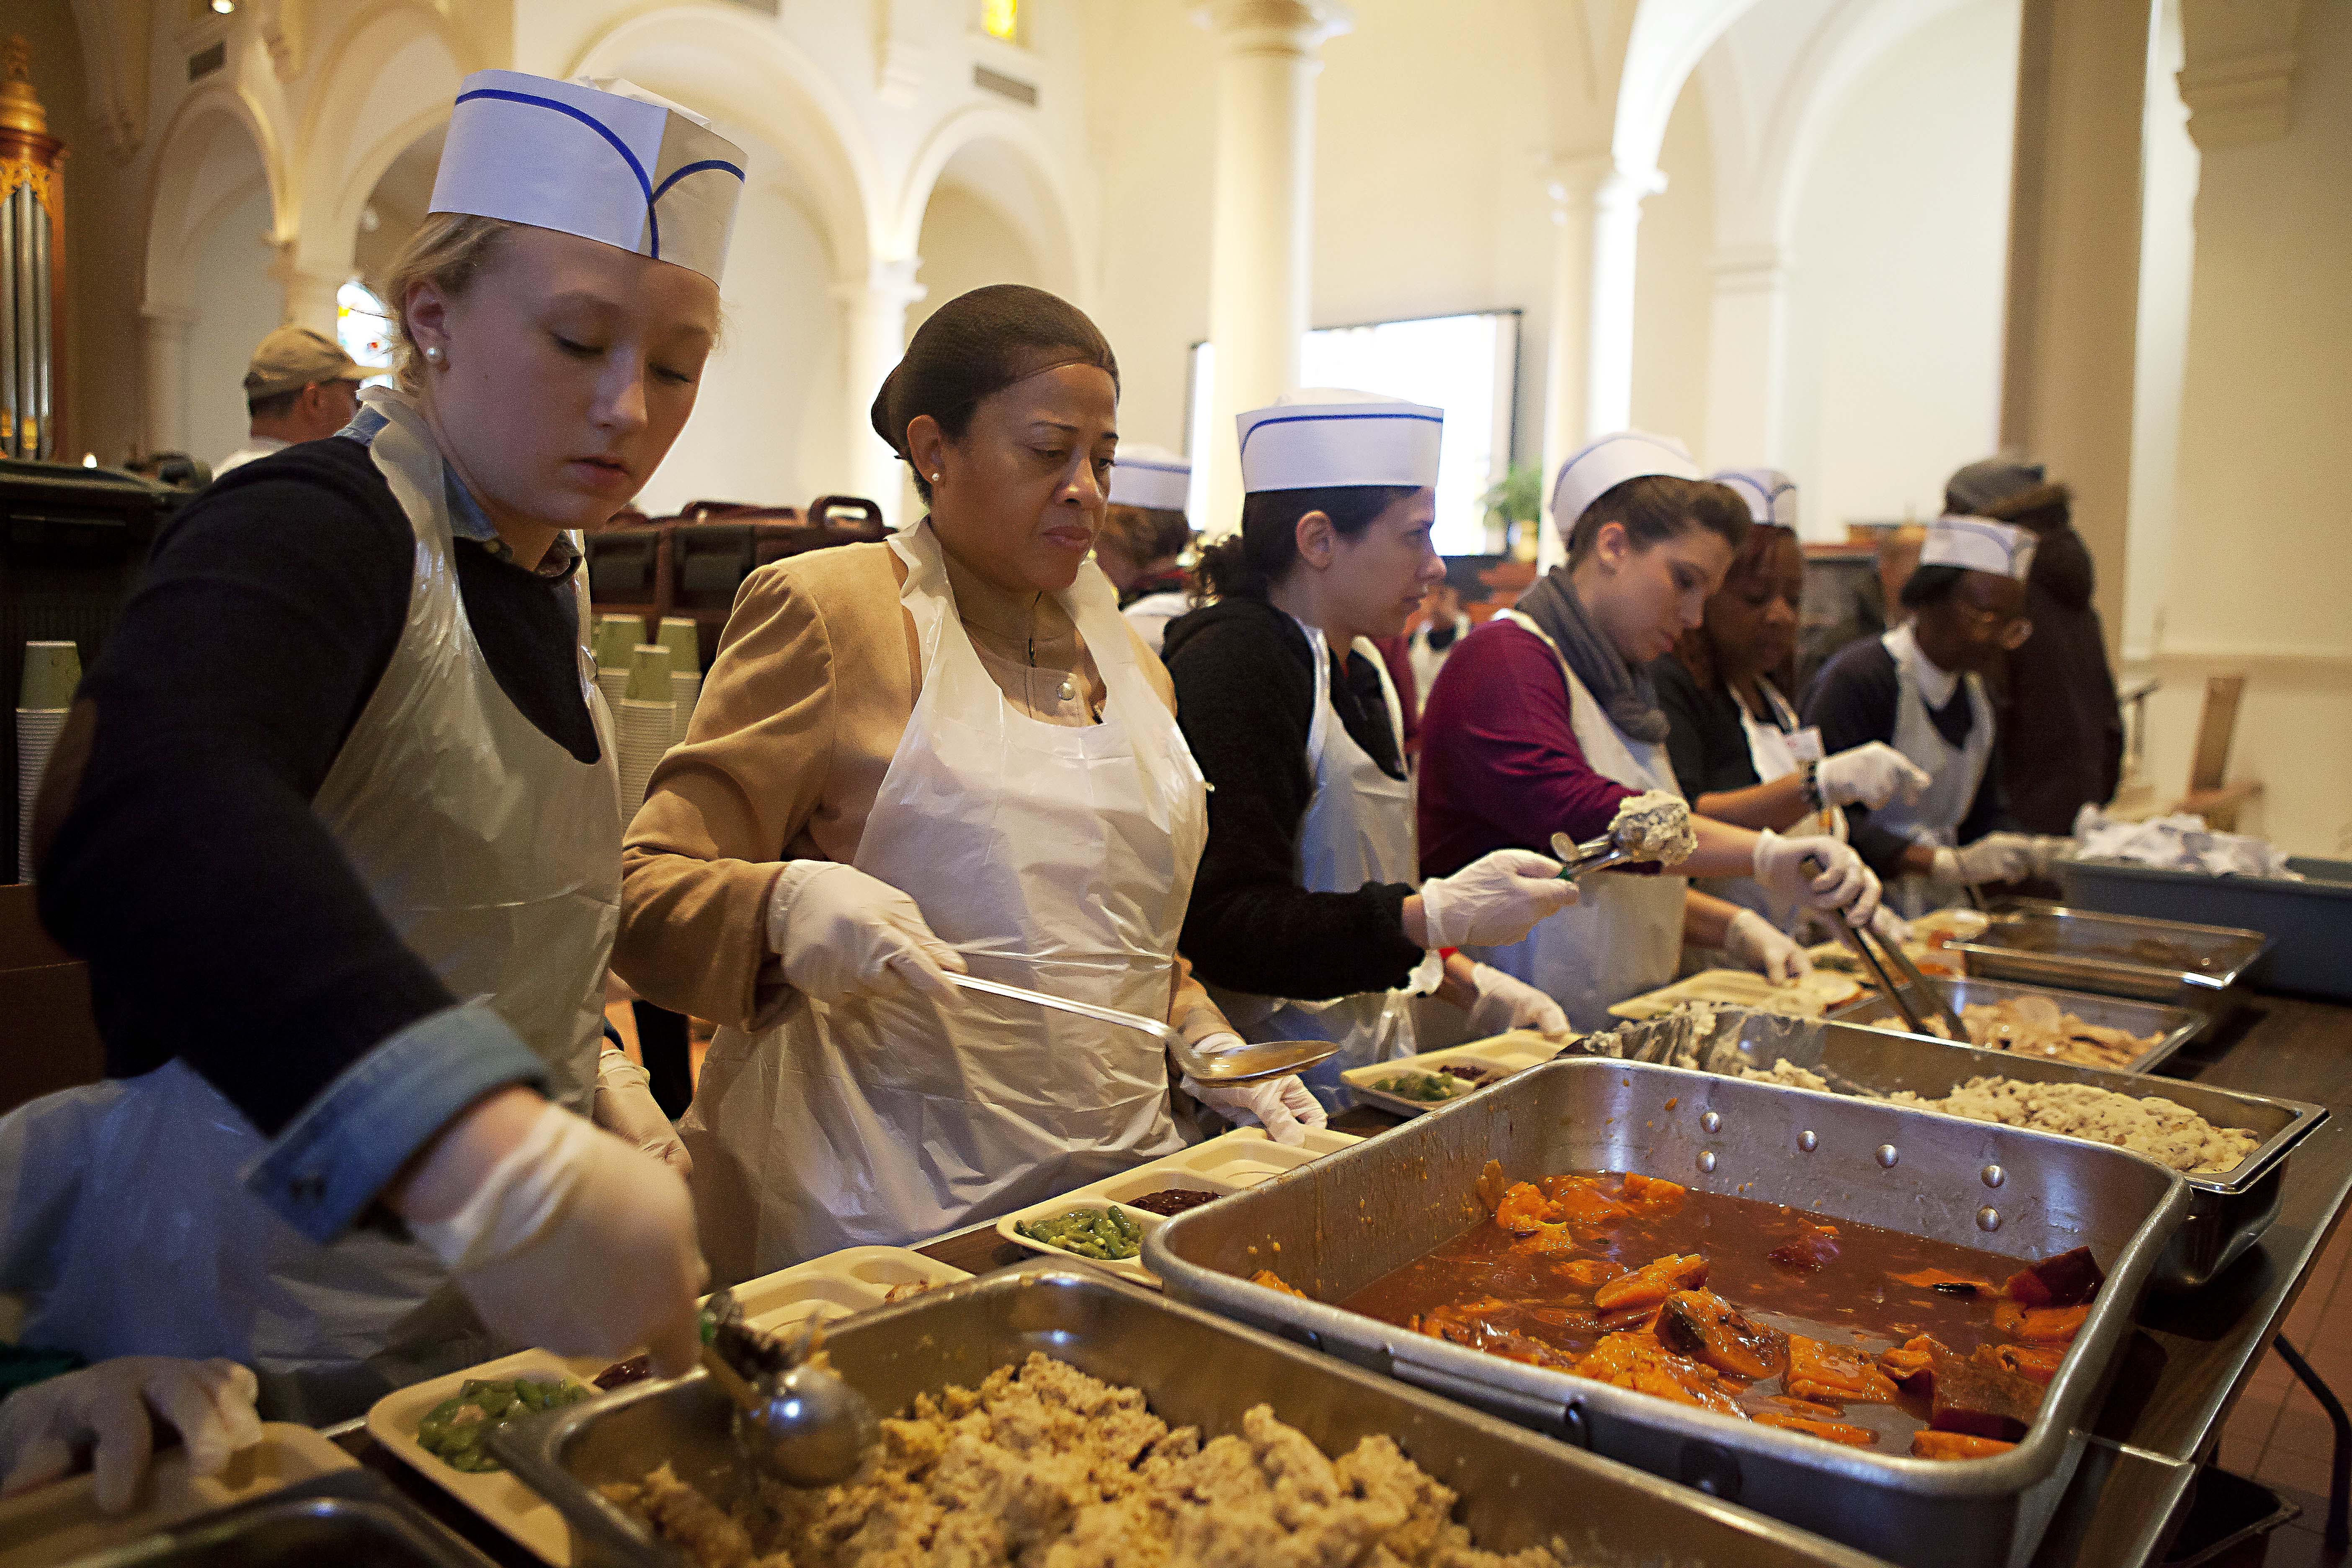 My Experience As A Volunteer At The Holy Apostles Soup Kitchen On